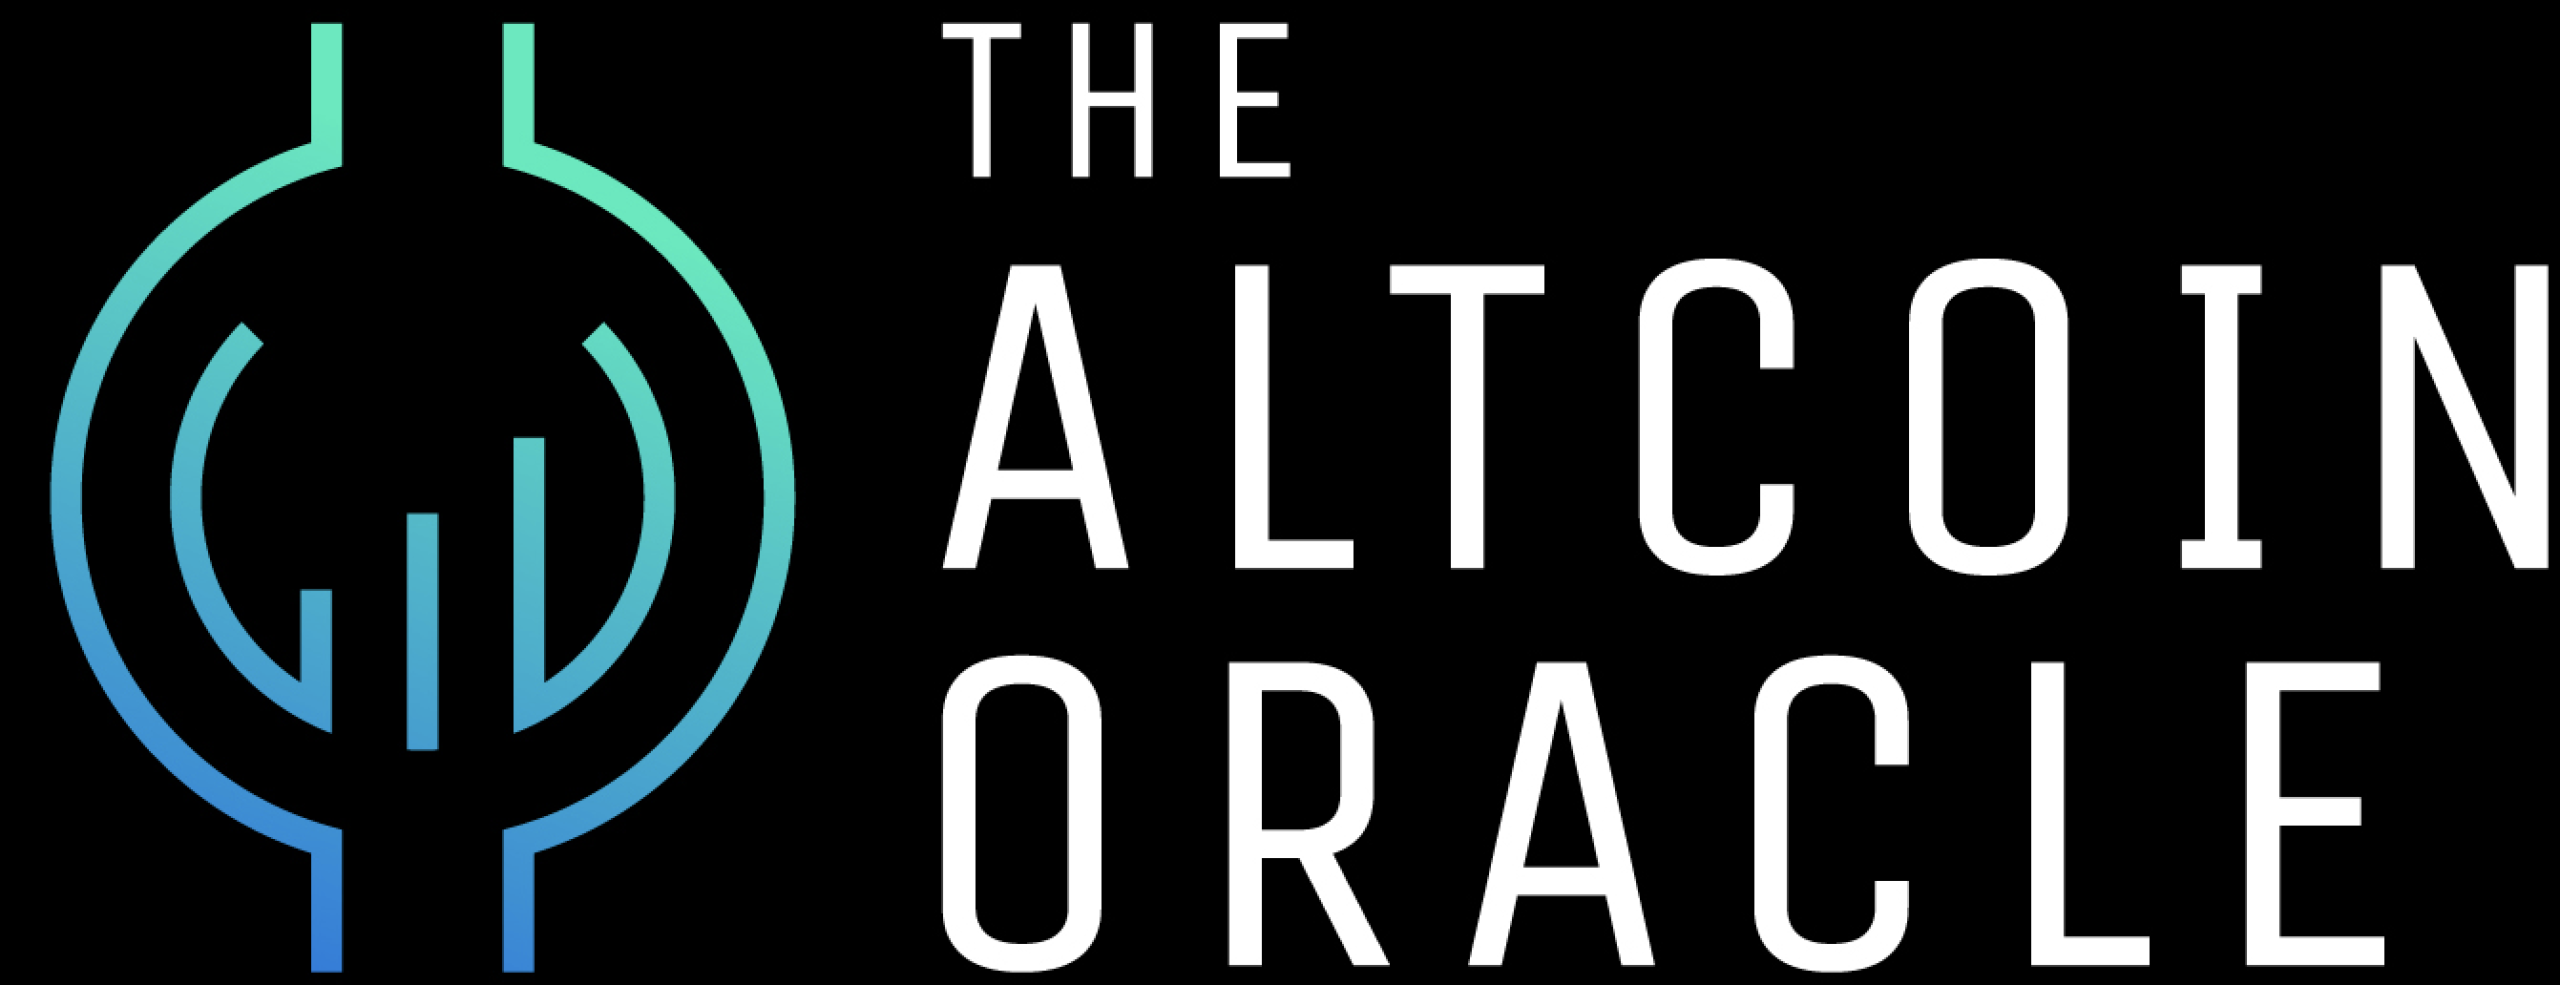 The Altcoin Oracle